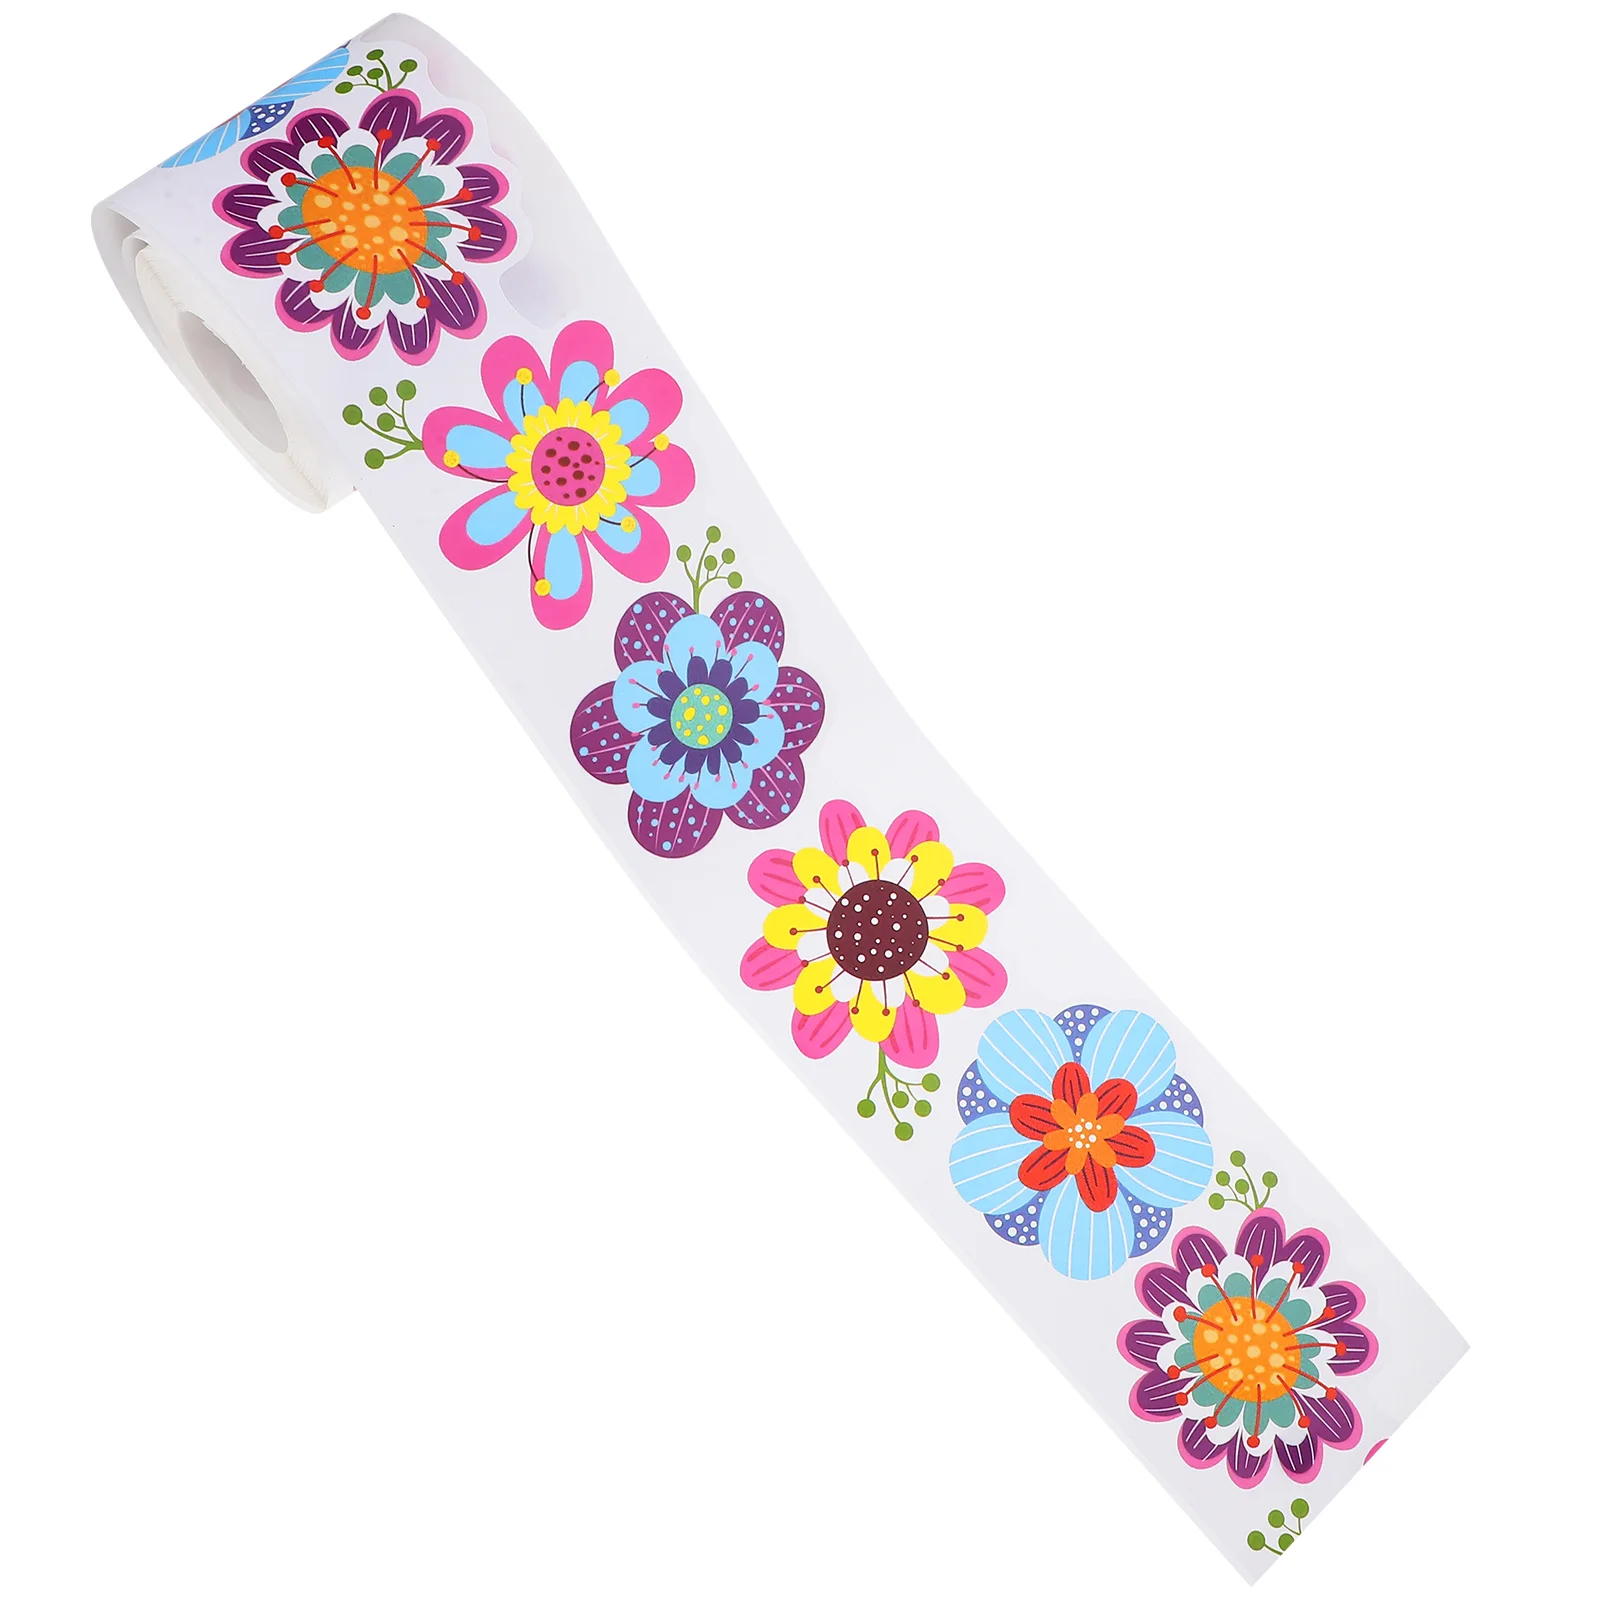 

Bulletin Boards Border Trim The Flowers Festival Supplies Removable Paper Replaceable